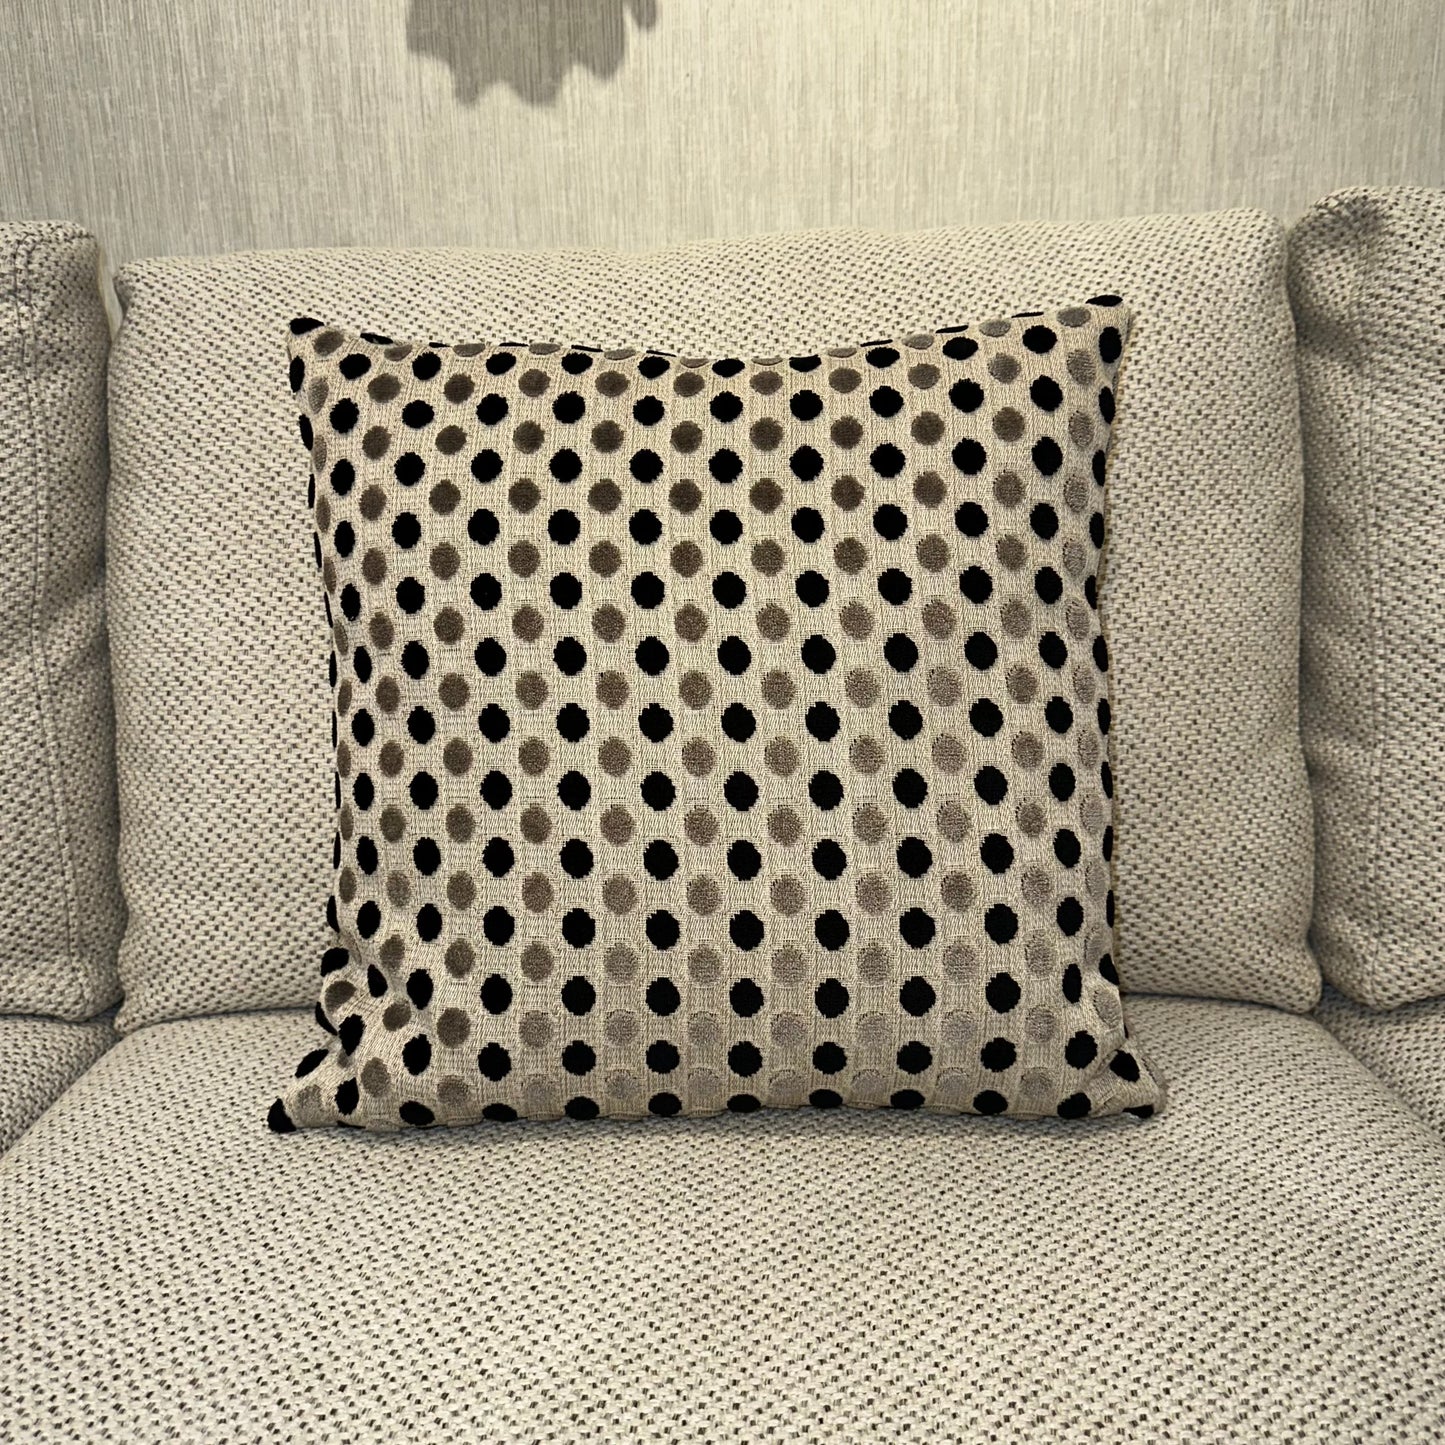 Dotted Throw Pillow